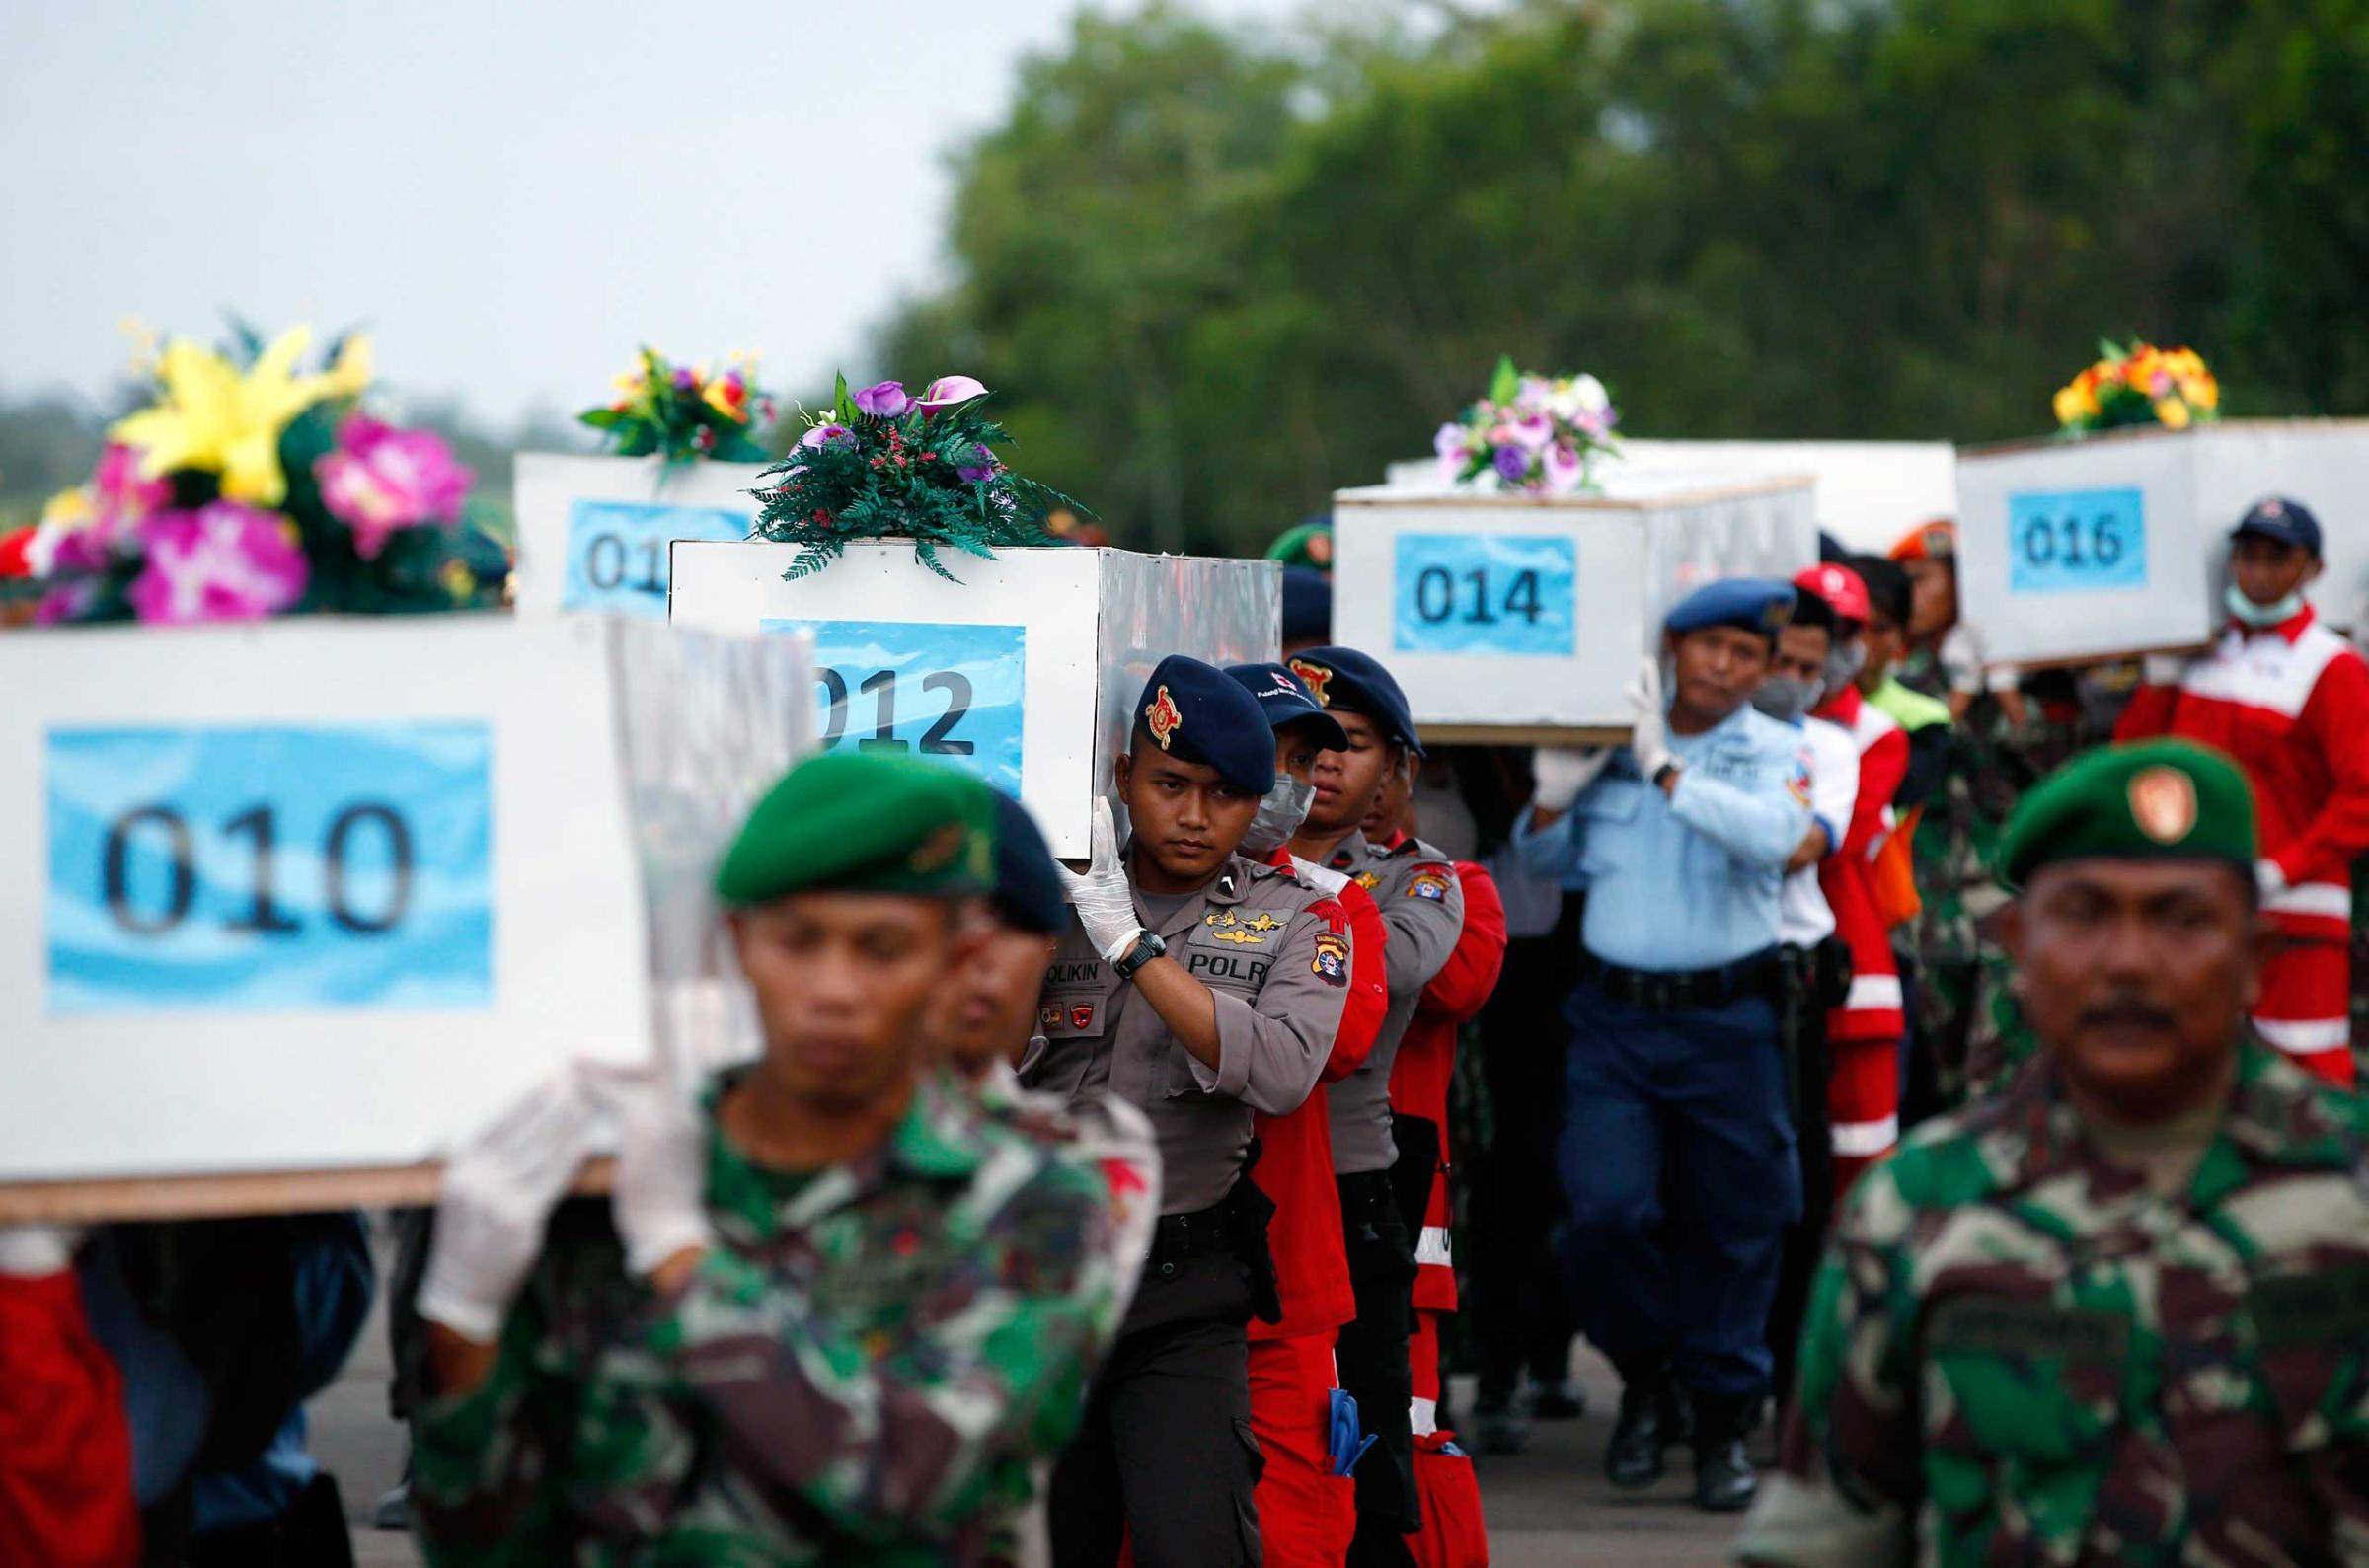 Jan. 2, 2015. Caskets containing the remains of AirAsia QZ8501 passengers recovered from the sea are carried to a military transport plane before being transported to Surabaya, Indonesia.